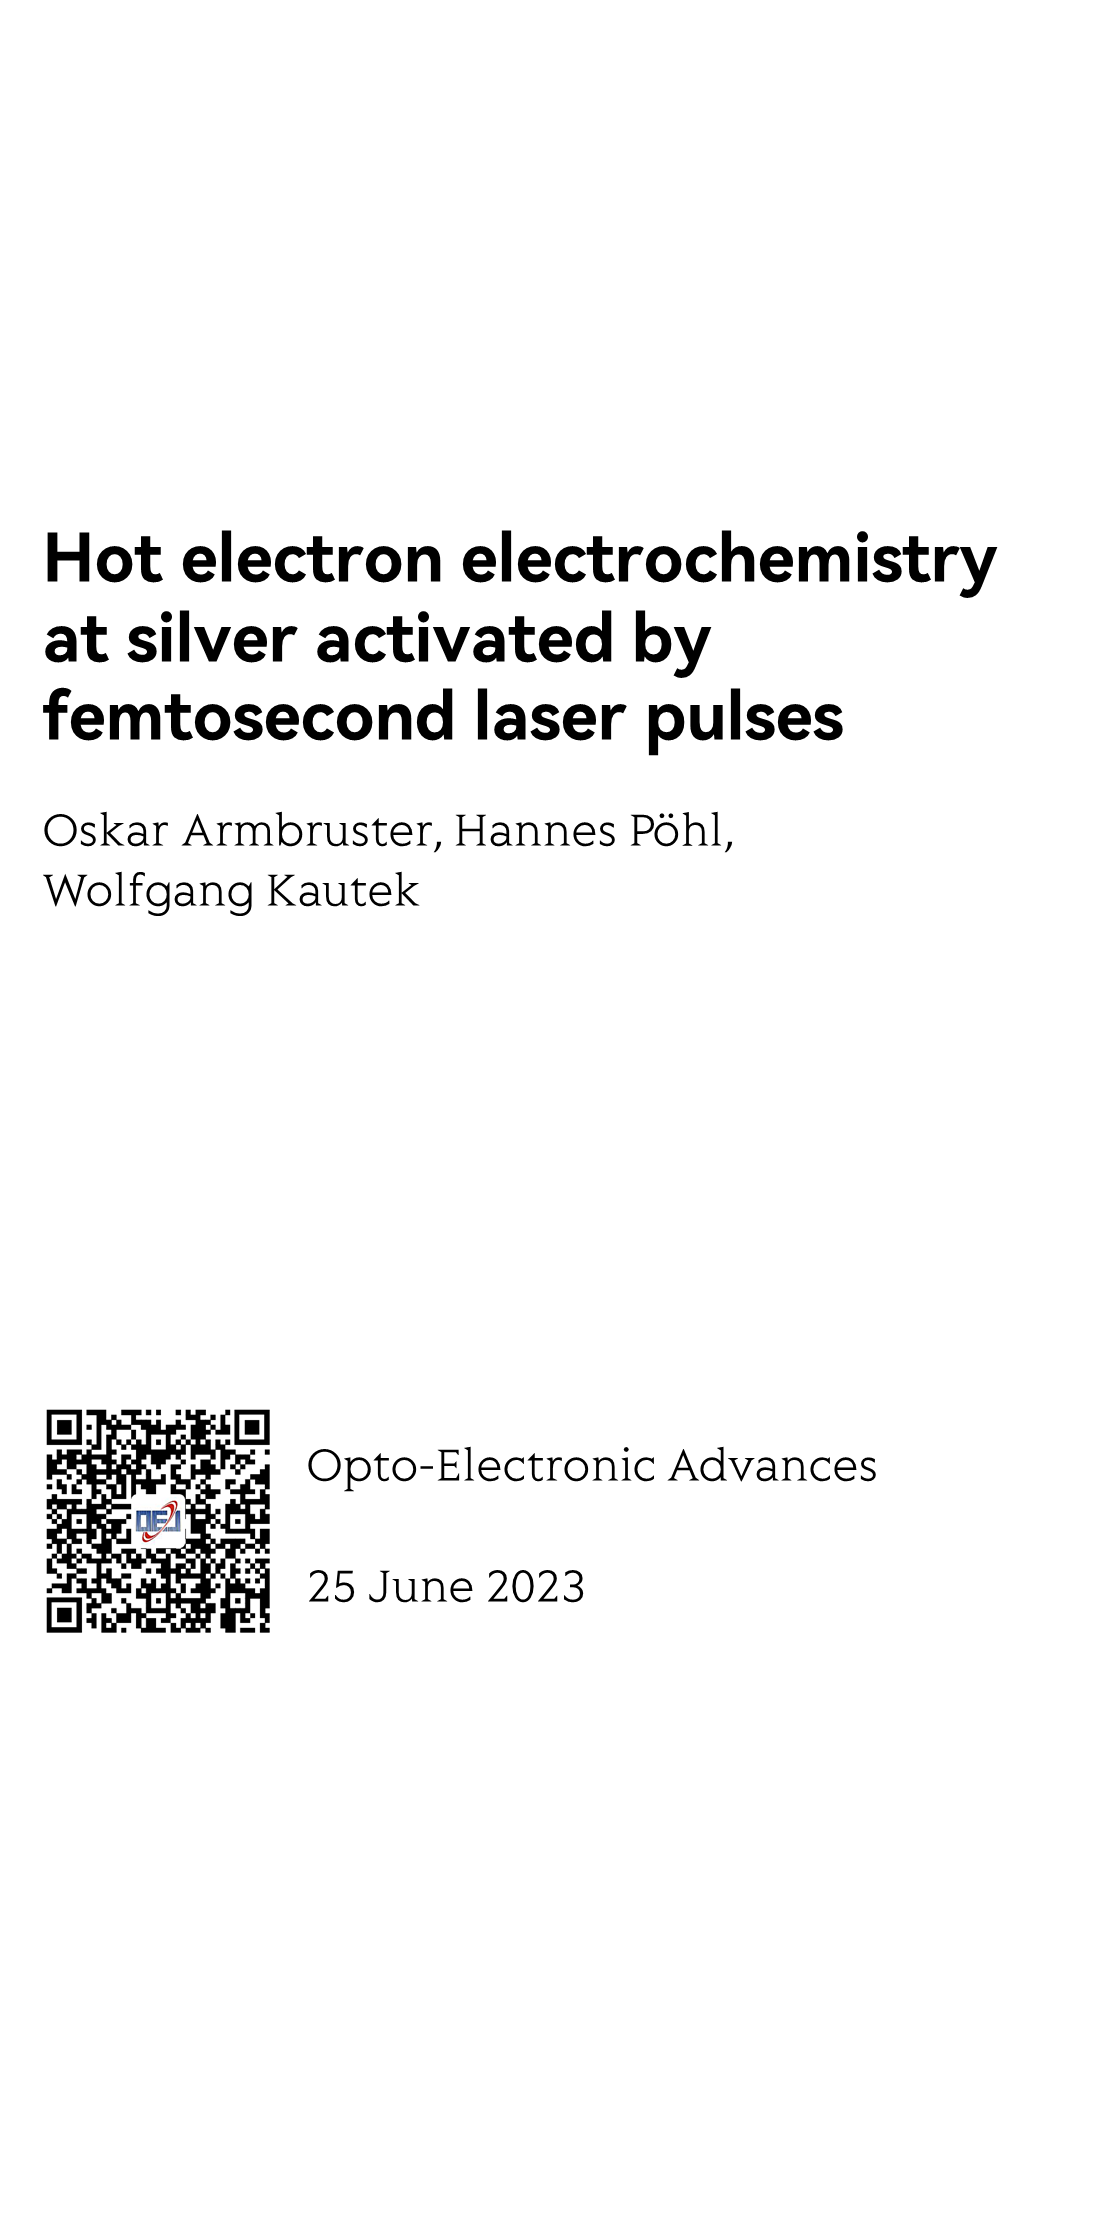 Hot electron electrochemistry at silver activated by femtosecond laser pulses_1